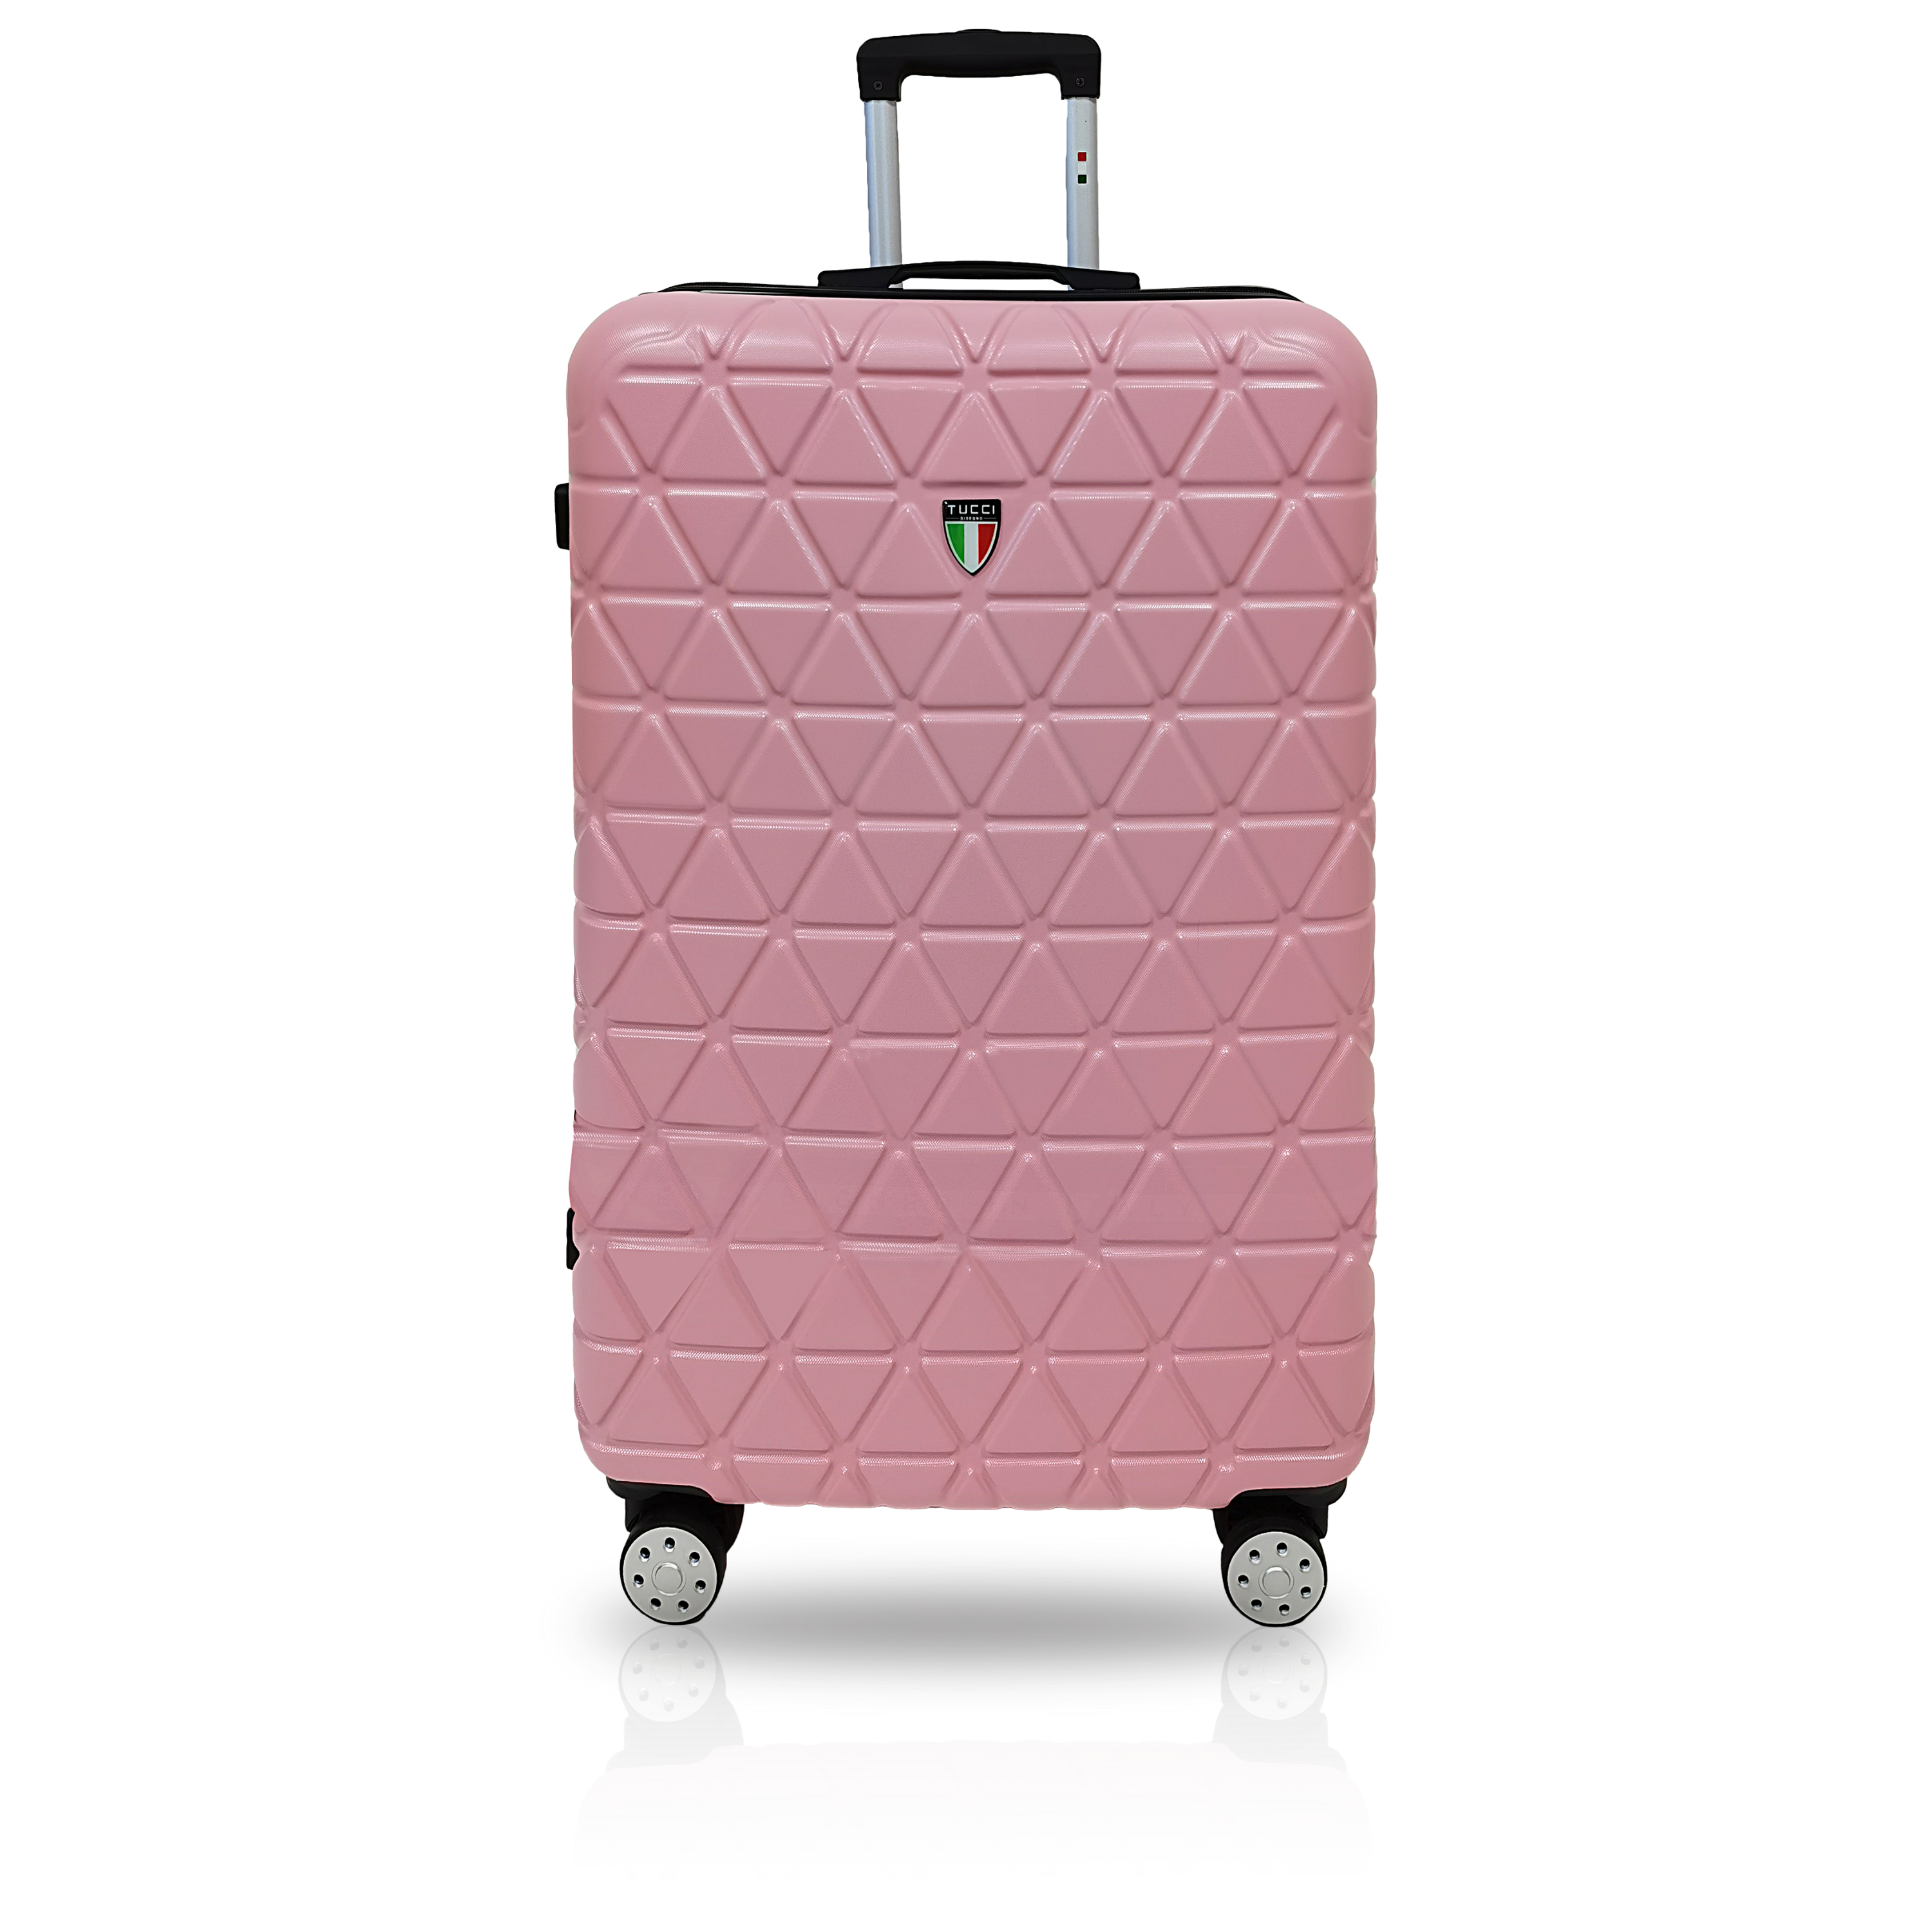 TUCCI Italy TESSERE ABS 24" Medium Spinner Suitcase